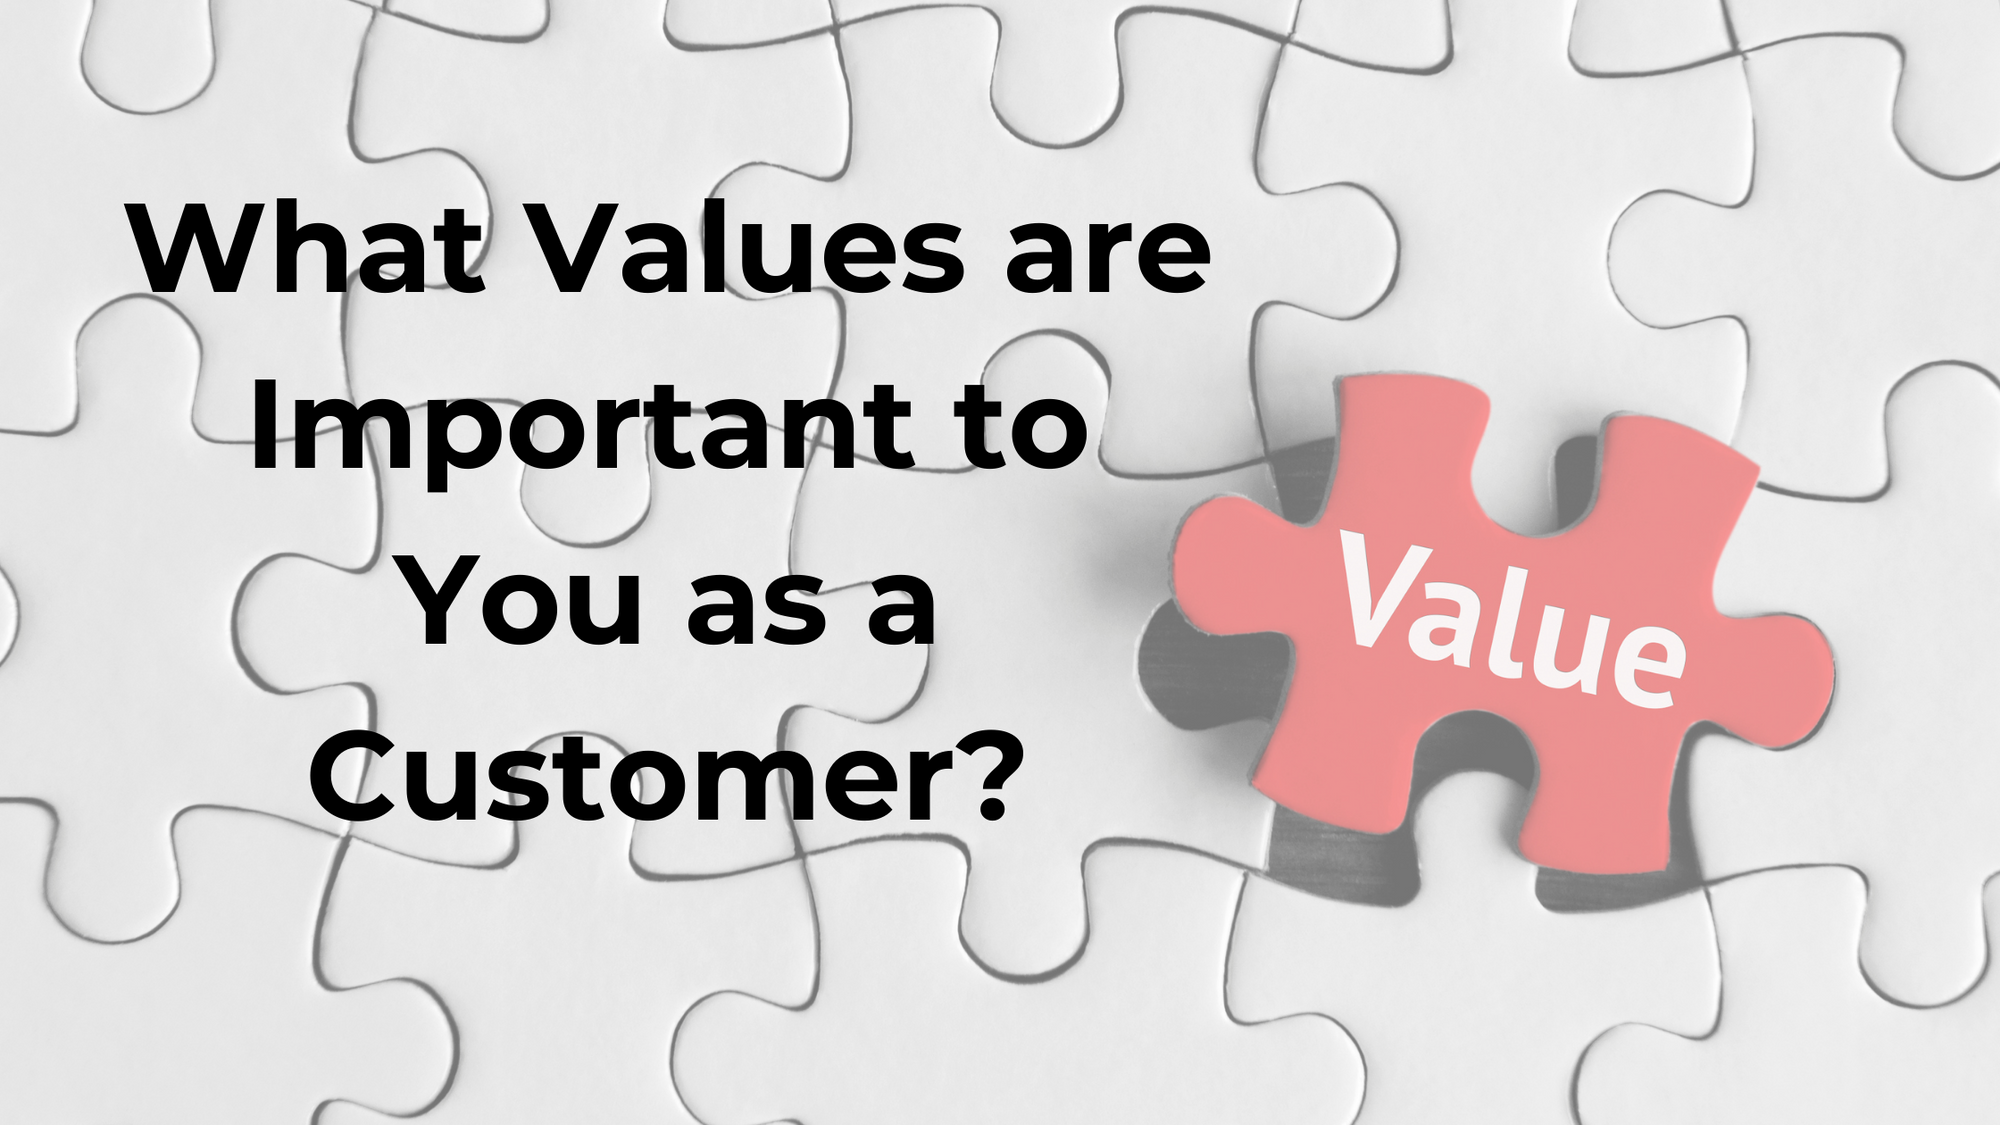 What Values are Important to You as a Customer?